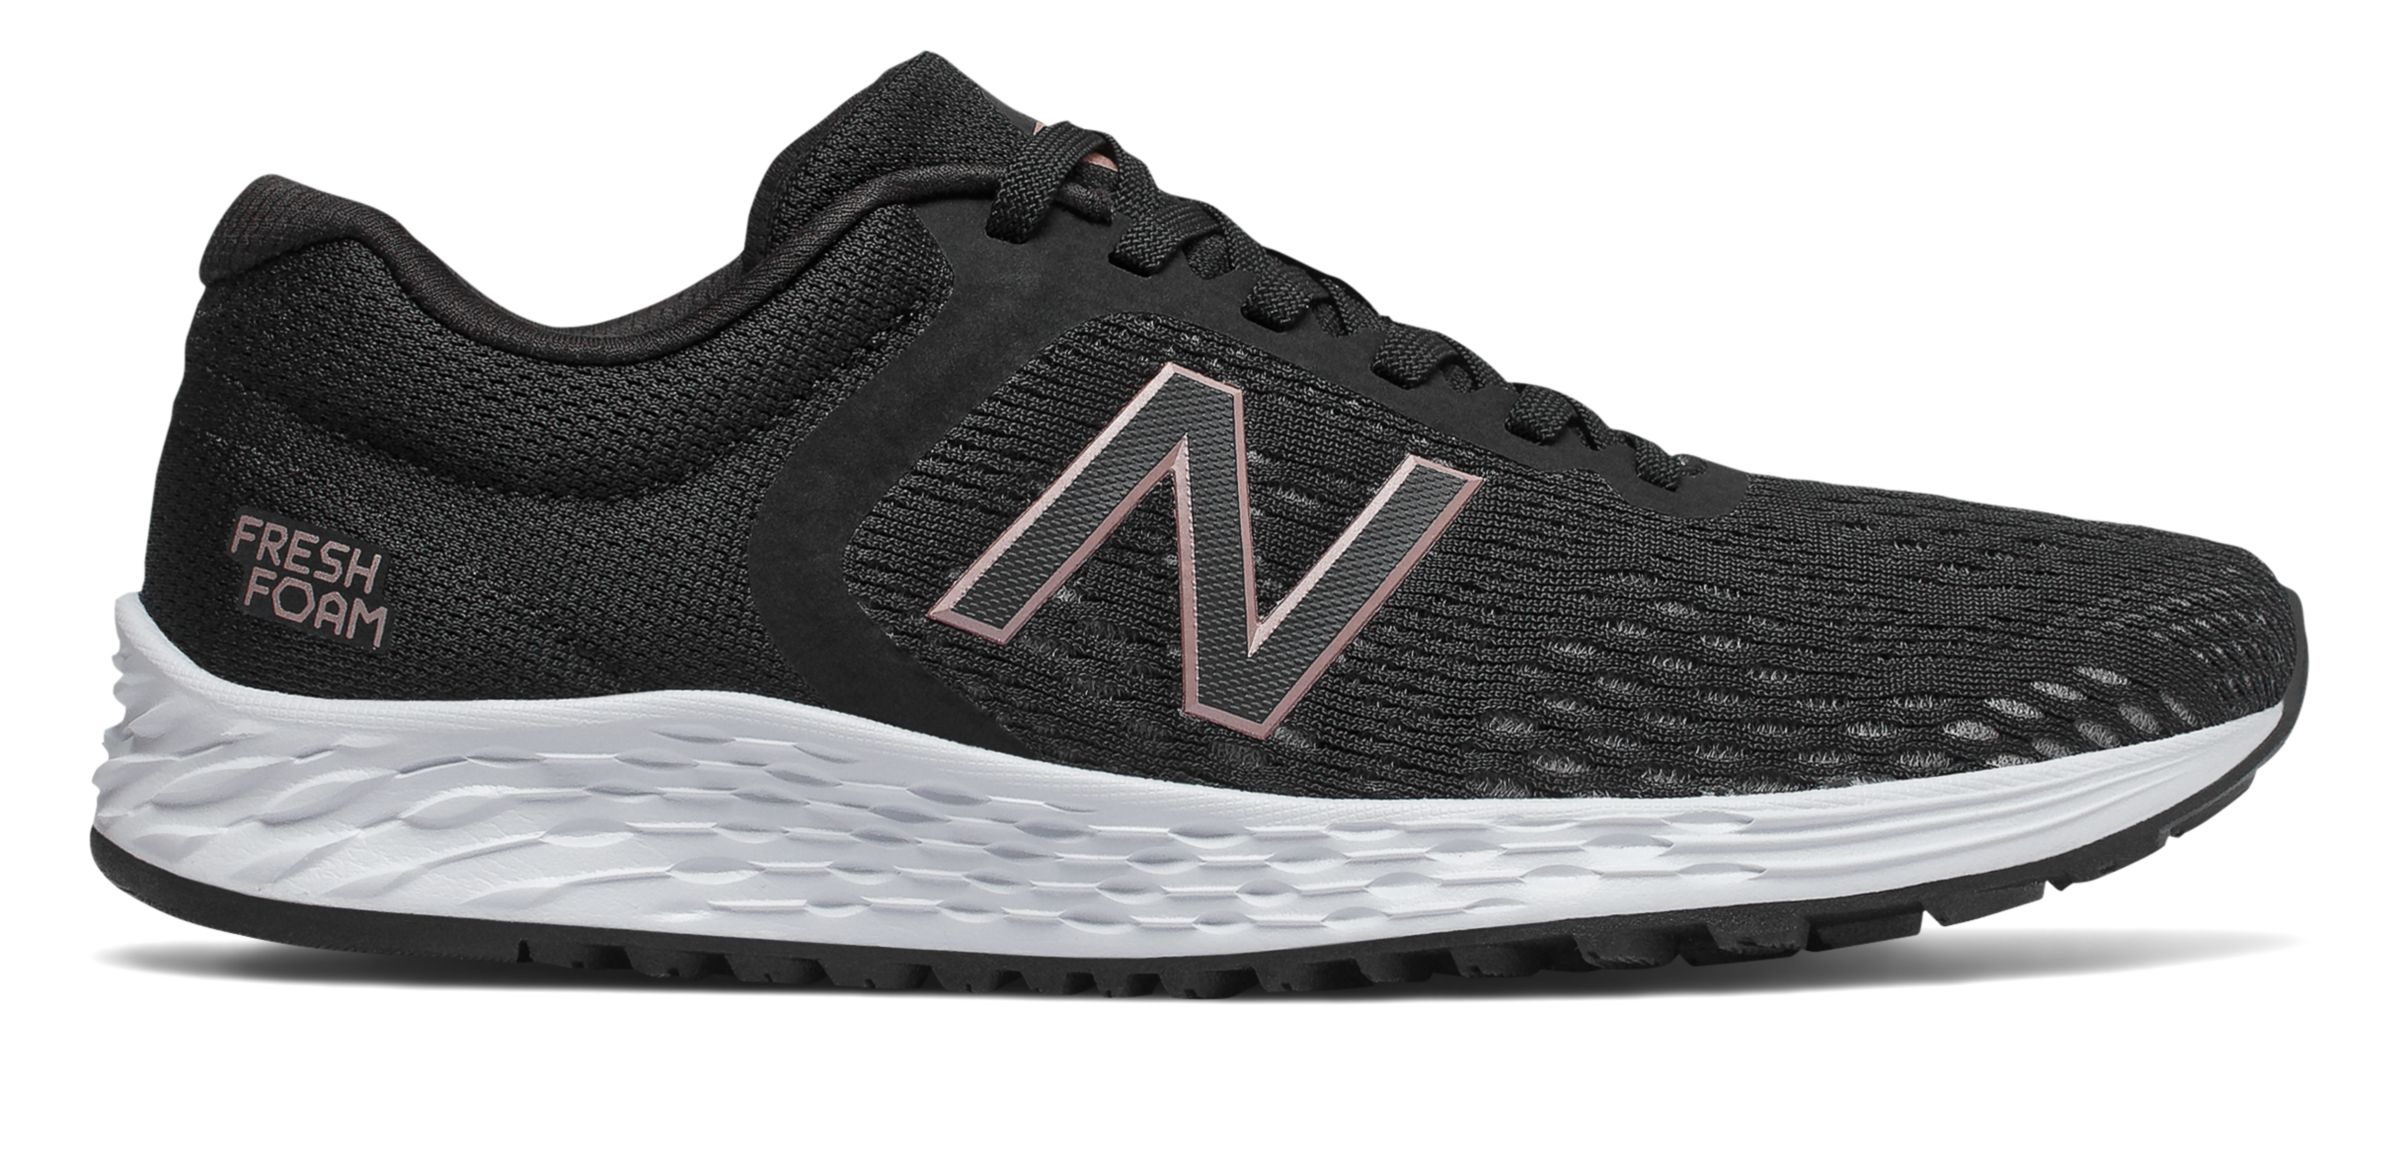 New Balance WARIS-V2 on Sale - Discounts Up to 50% Off on WARISLW2 at Joe's  New Balance Outlet